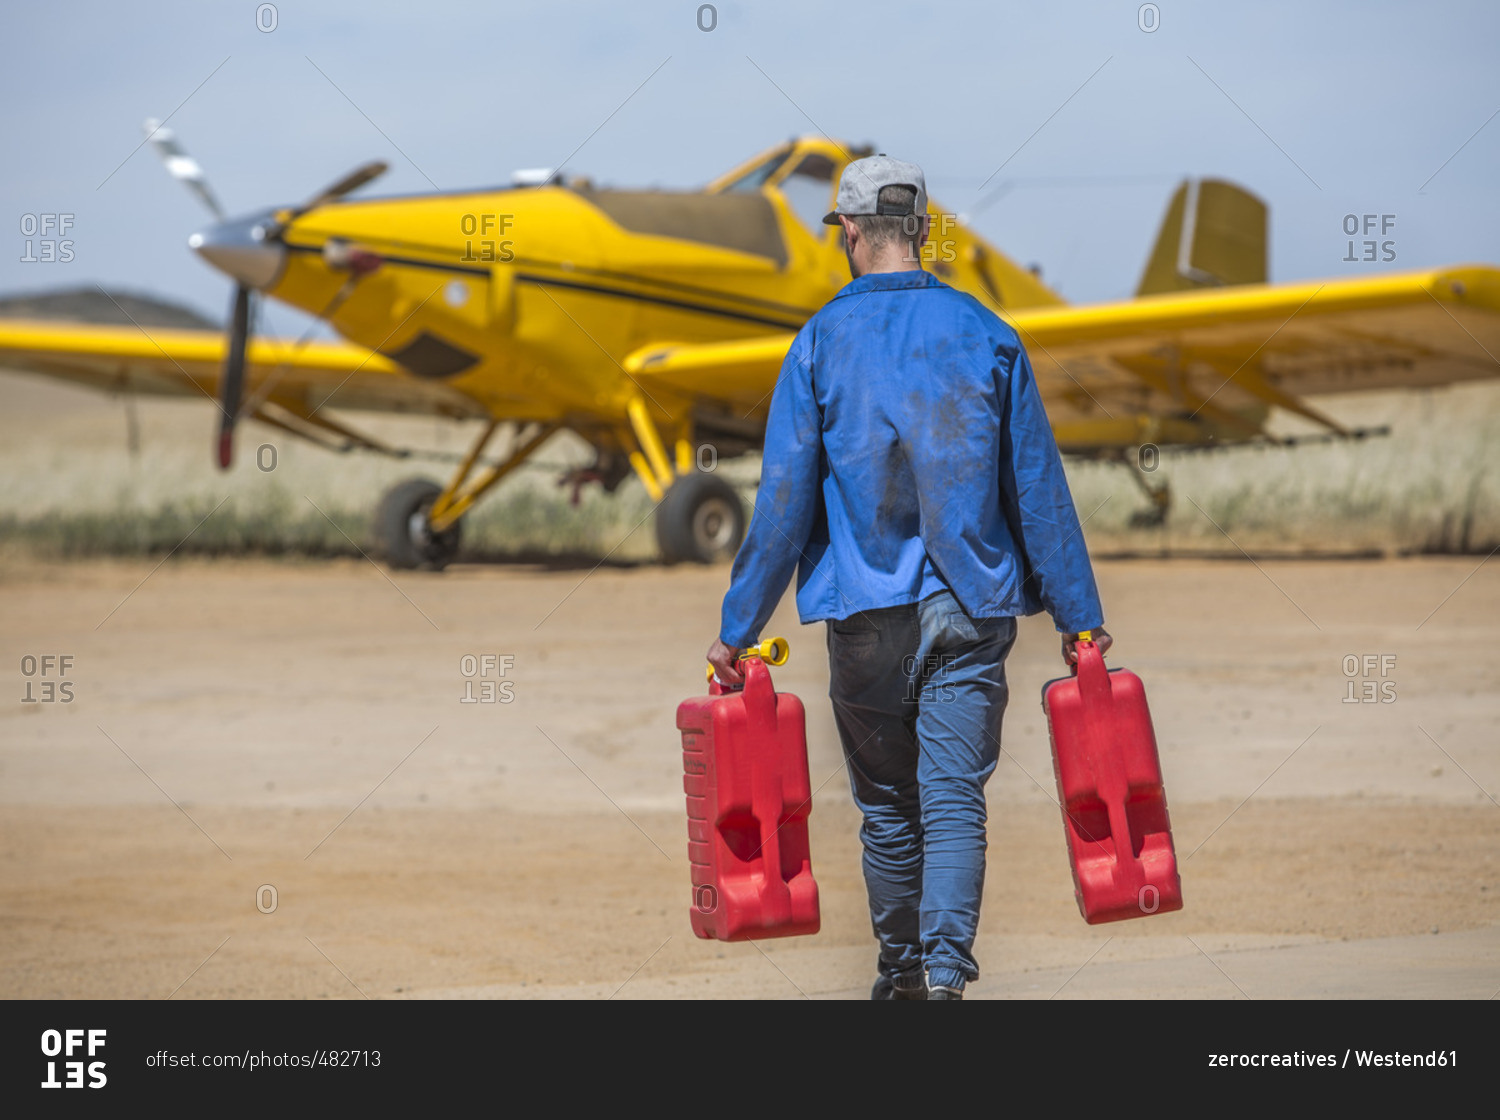 Mechanic carrying jerry cans towards yellow crop dusting plane